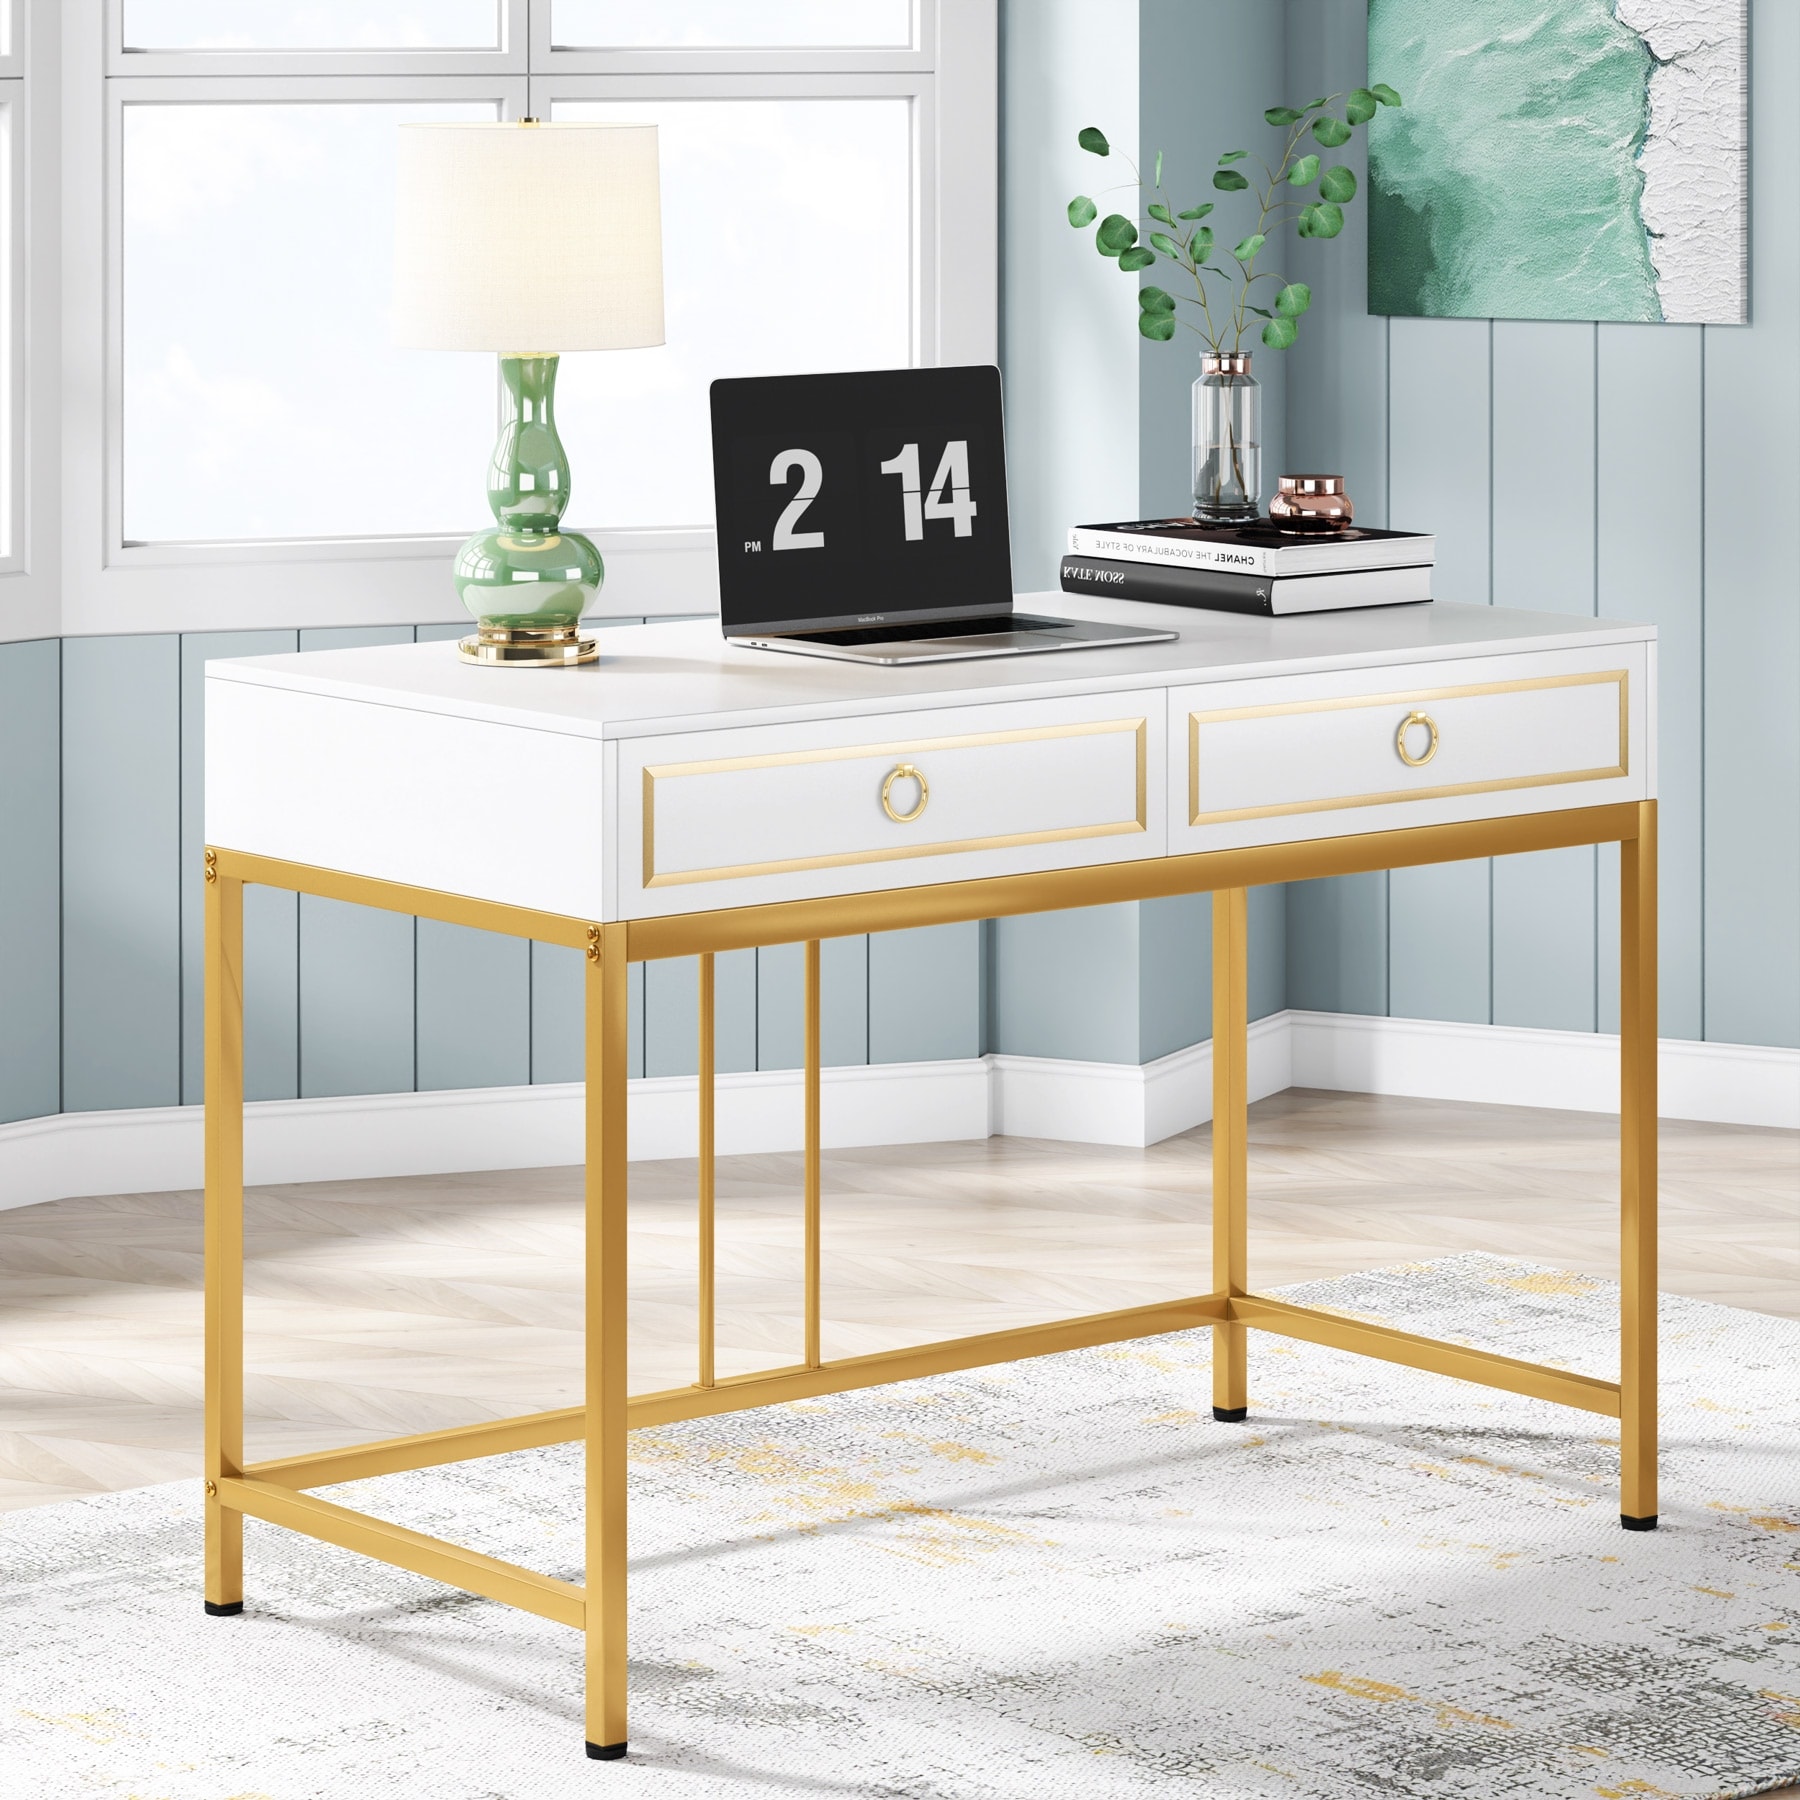 https://ak1.ostkcdn.com/images/products/is/images/direct/66717e3bcf7b4597bd140edf6ebb304d73488cf6/Computer-Desk-with-2-Drawers%2C-39.4%22-Modern-Simple-White-and-Gold-Writing-Desk-with-Storage-Drawers%2C-Makeup-Vanity-Console-Table.jpg